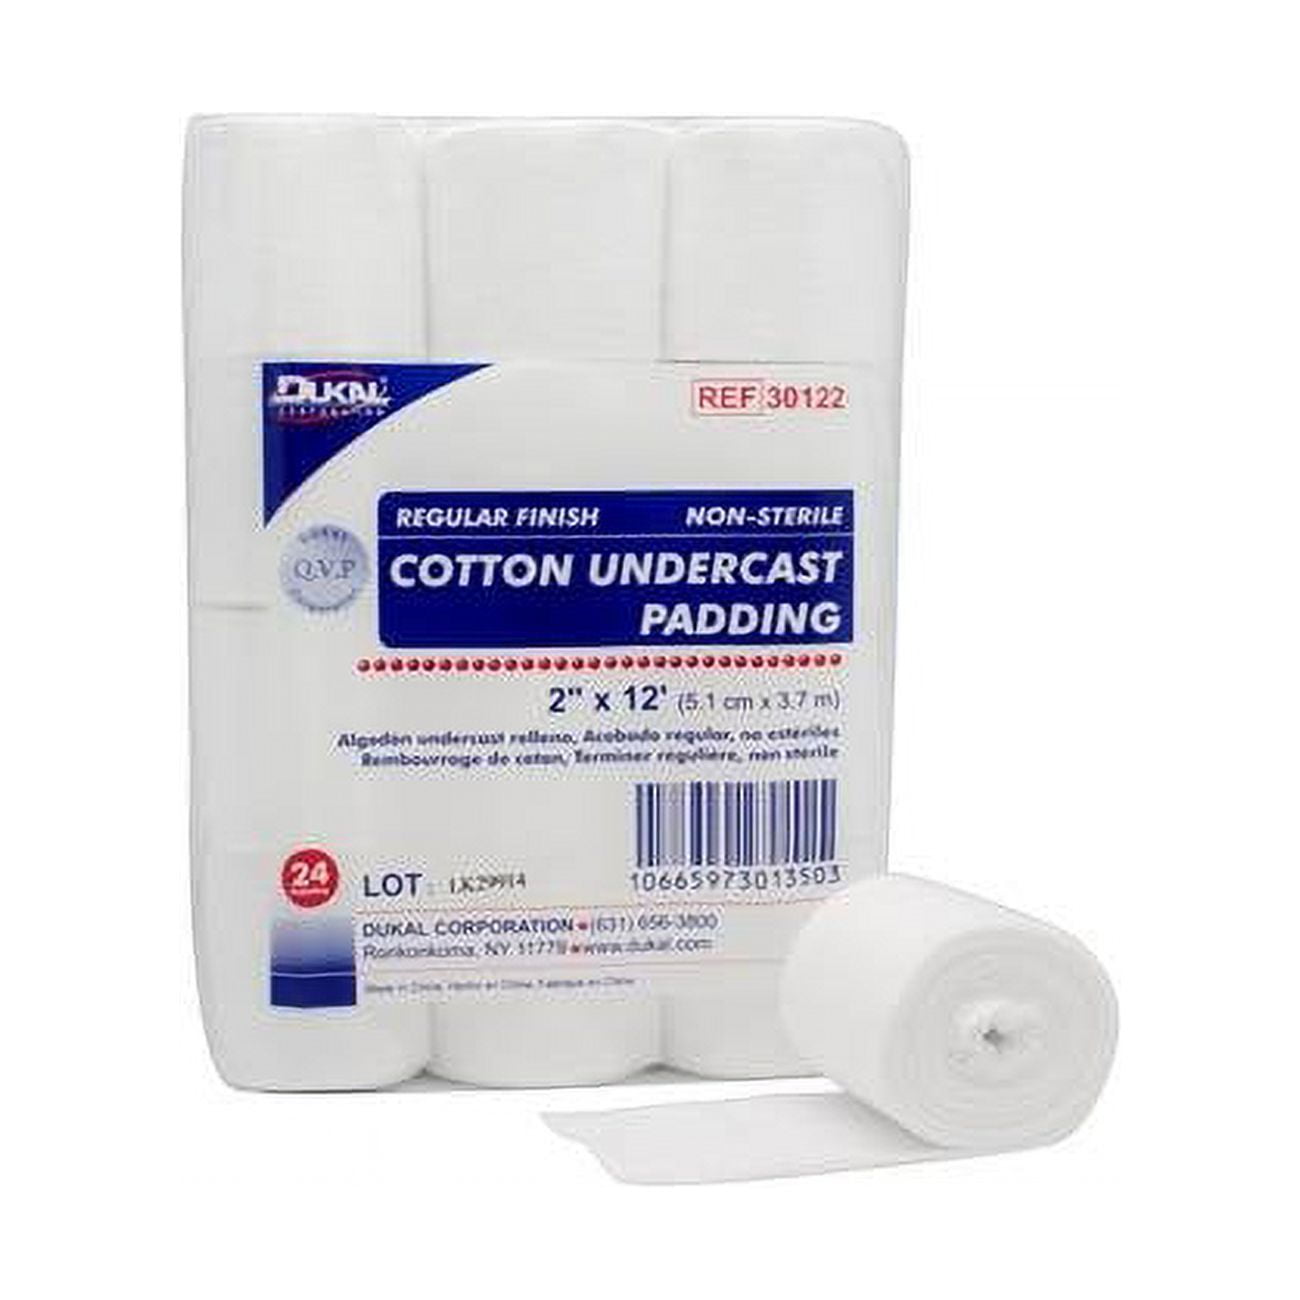 Picture of Dukal 30122 2 x 4 yards Cotton Undercast Padding, Regular